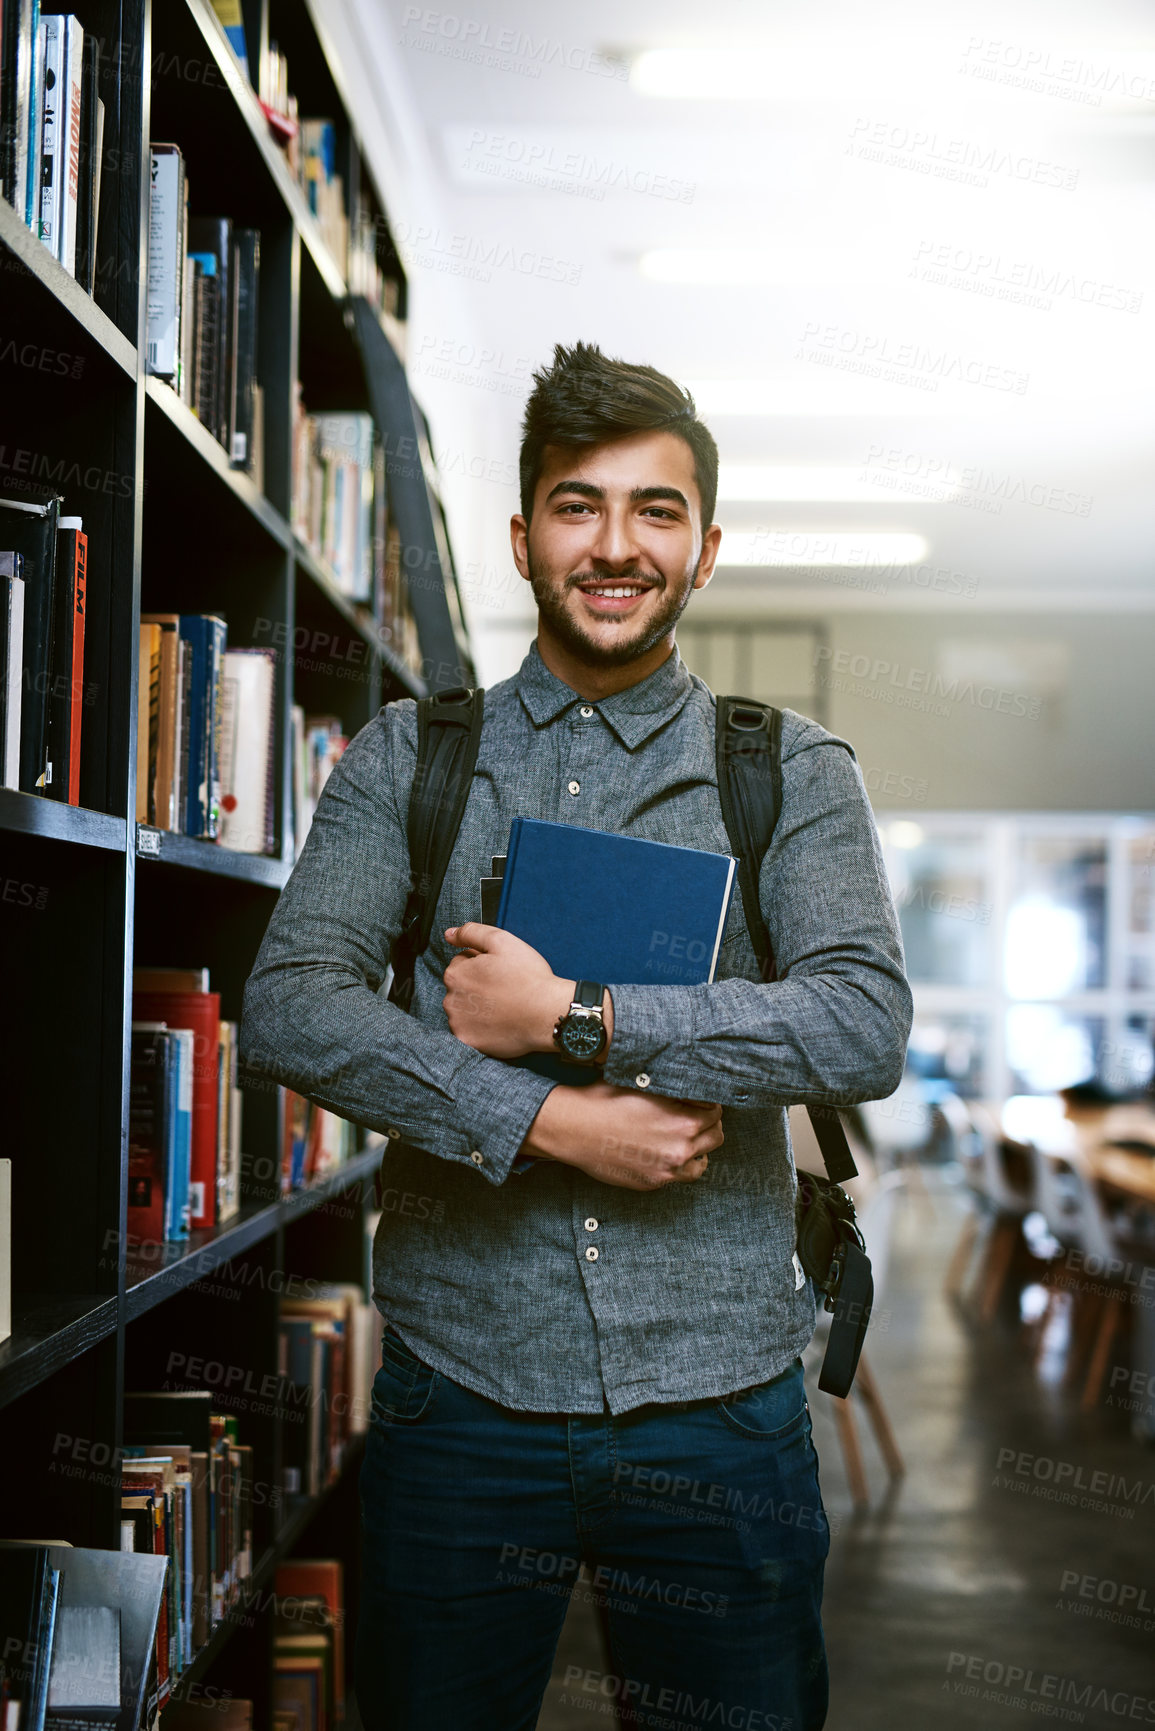 Buy stock photo Portrait of a happy young man carrying books in a library at college